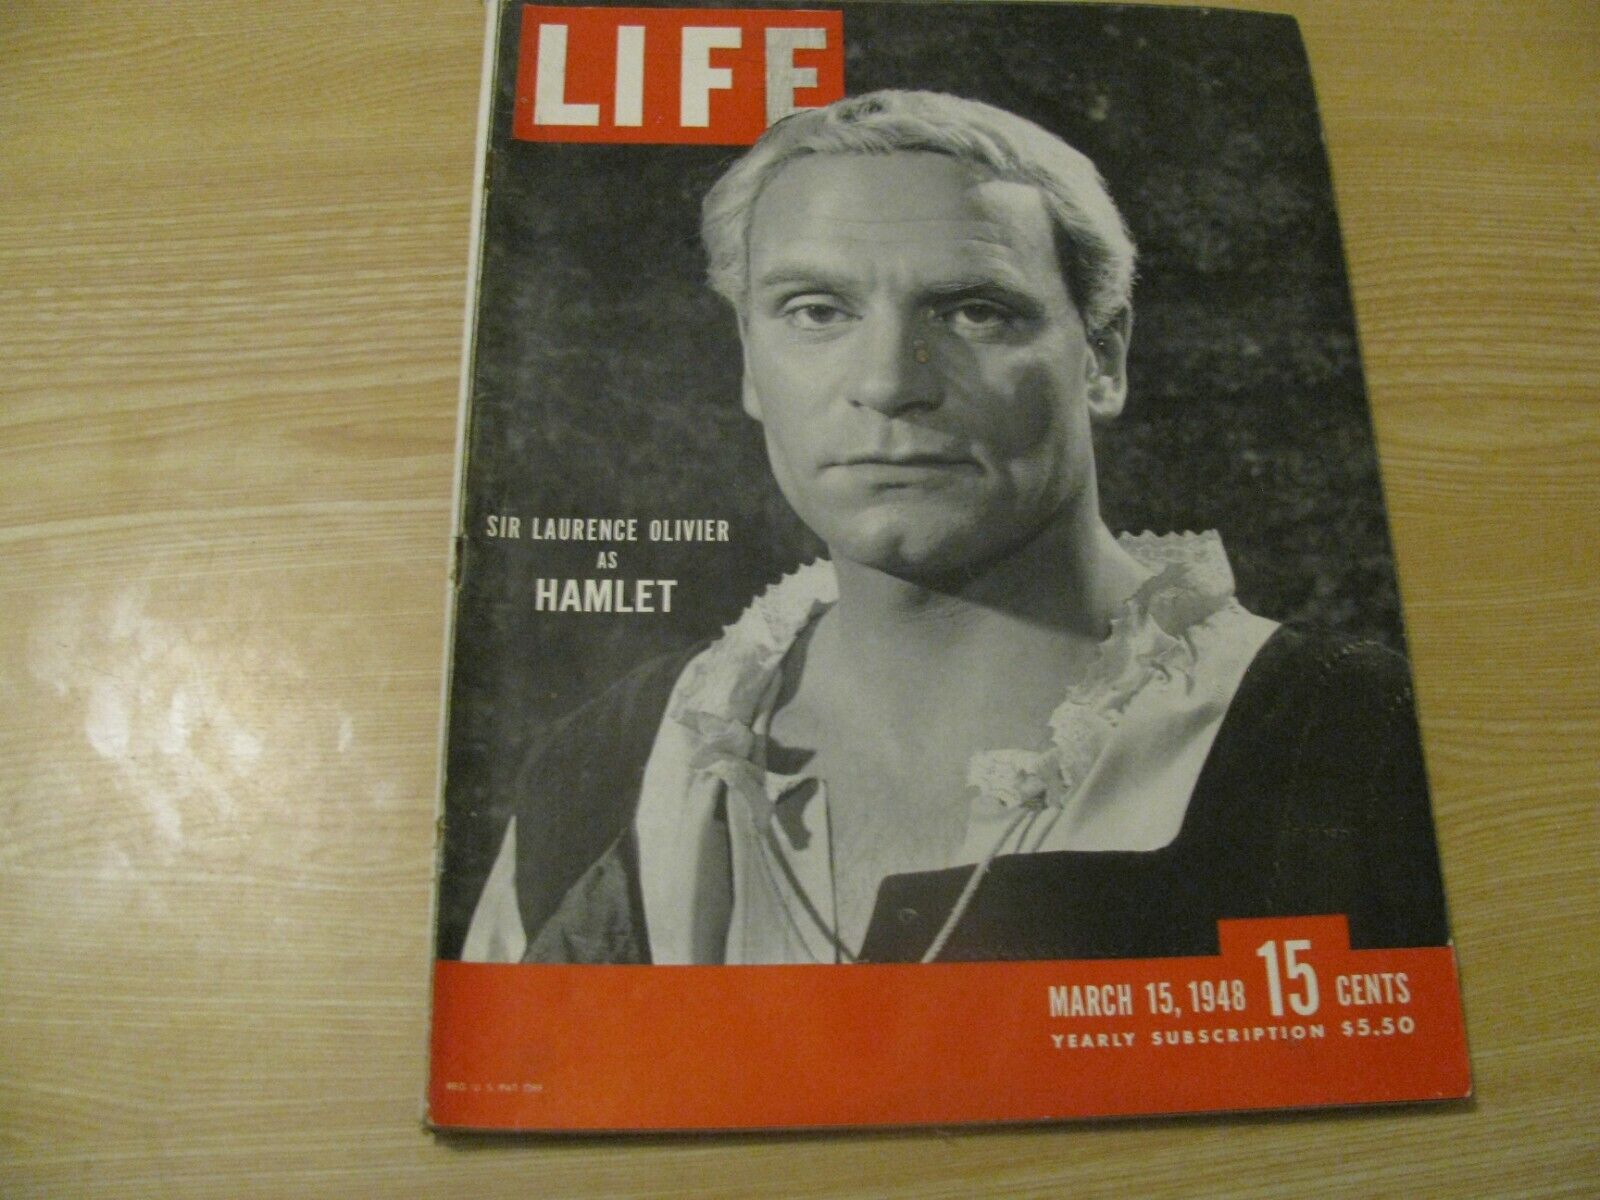 1948 LIFE MAGAZINE MARCH 15 SIR LAURENCE OLIVIER AS HAMLET  LOWEST PRICE ON EBAY